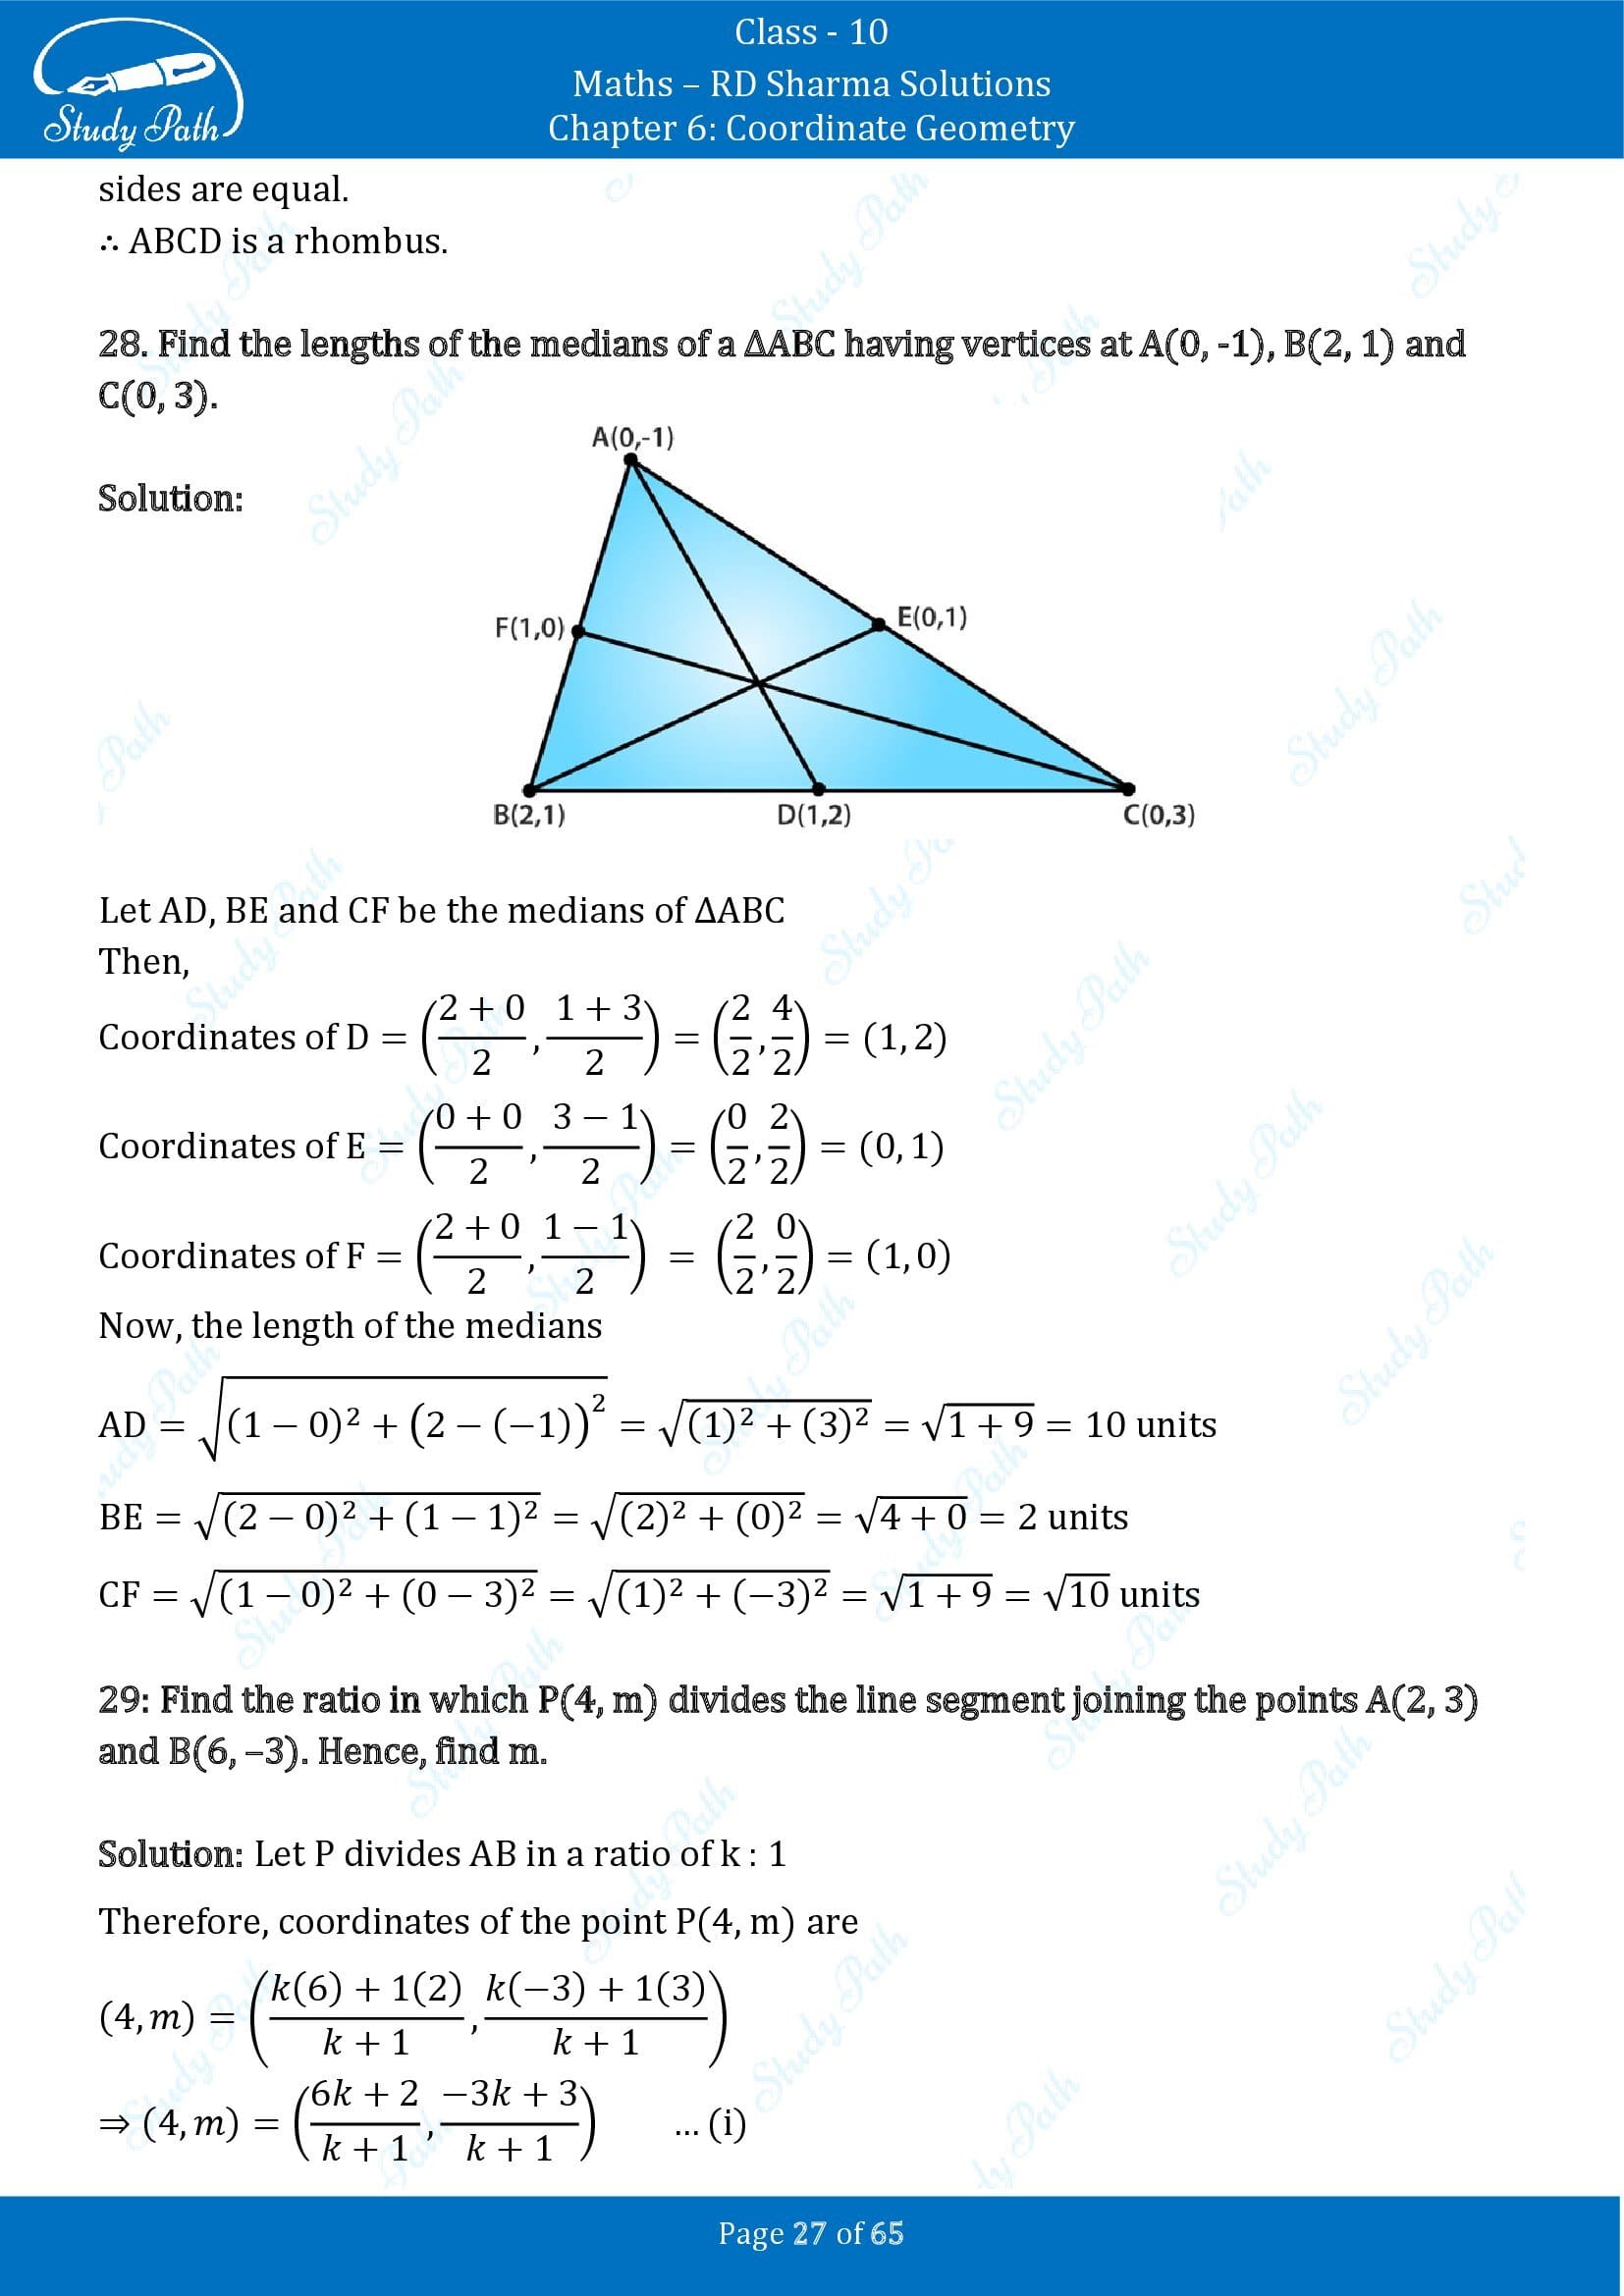 RD Sharma Solutions Class 10 Chapter 6 Coordinate Geometry Exercise 6.3 00027